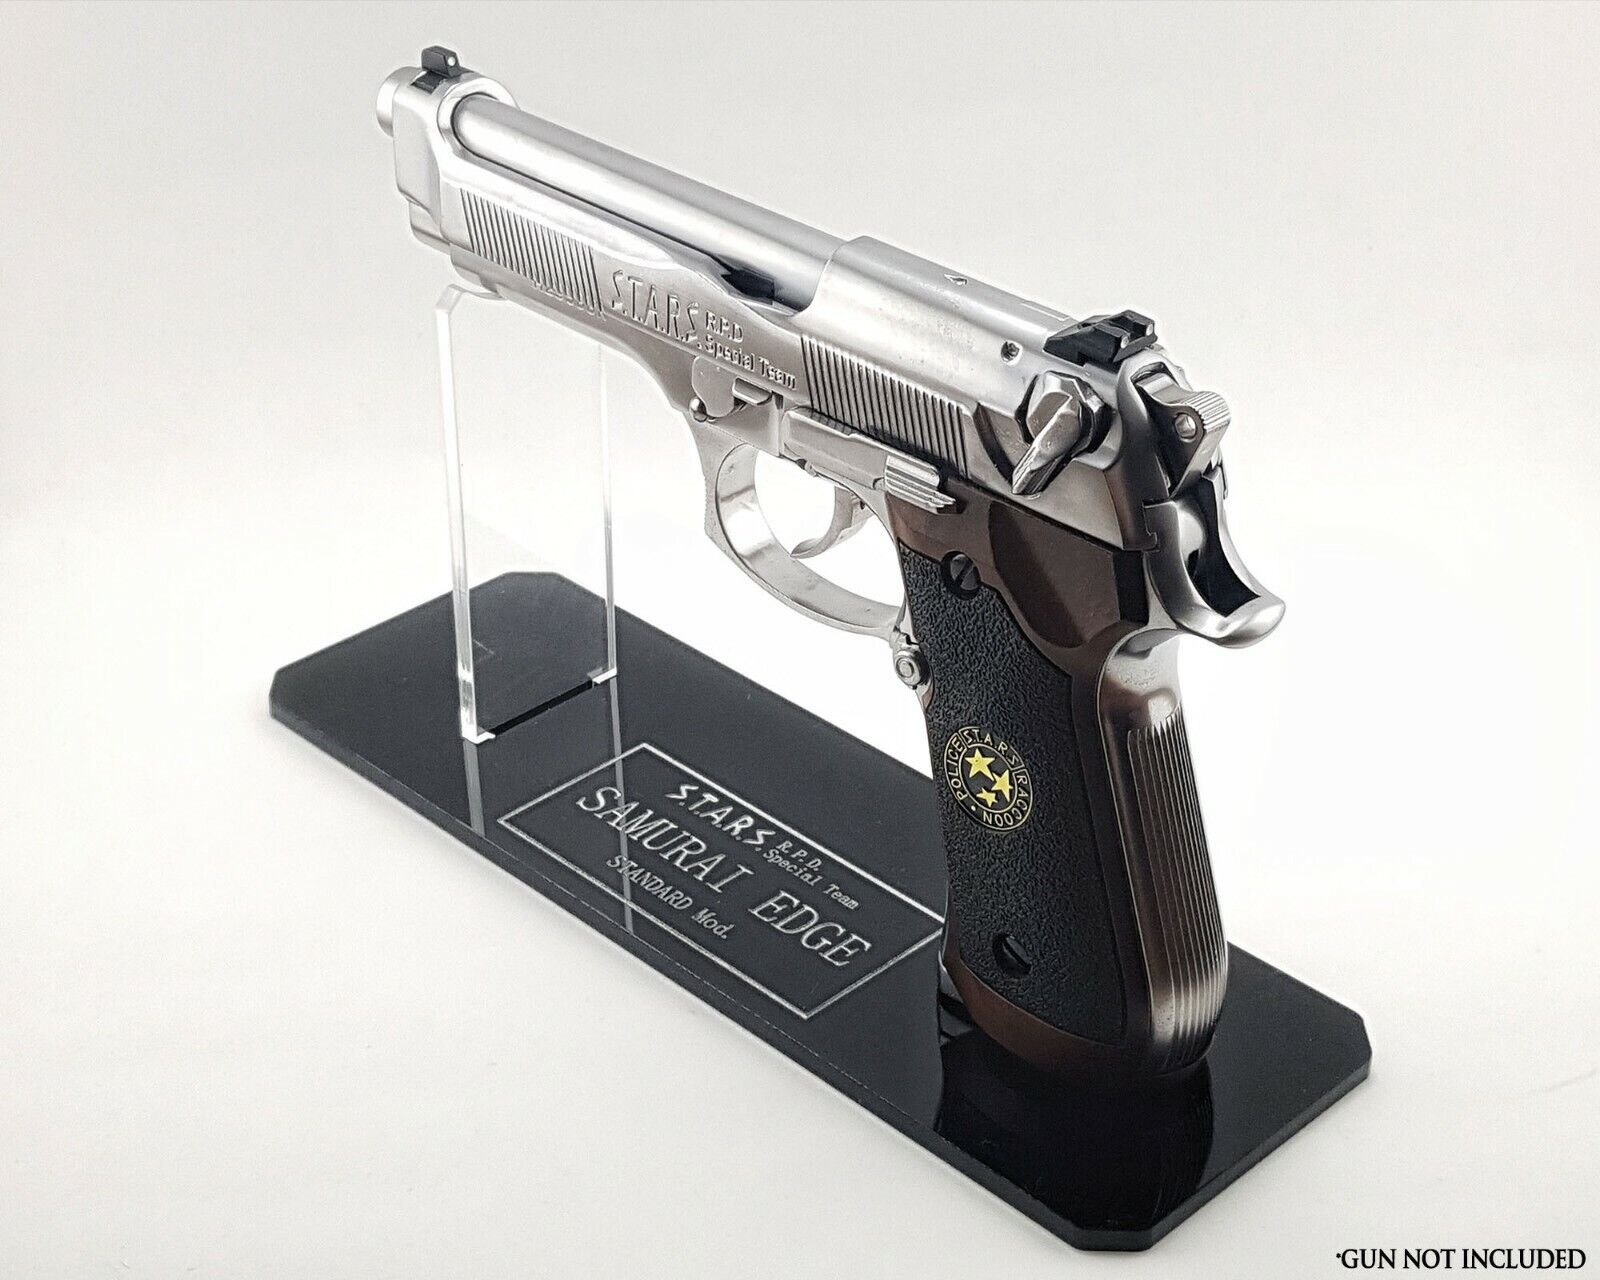 Classic Piano Black Acrylic Beretta M92 Stand with Engraved Text (Customizable)